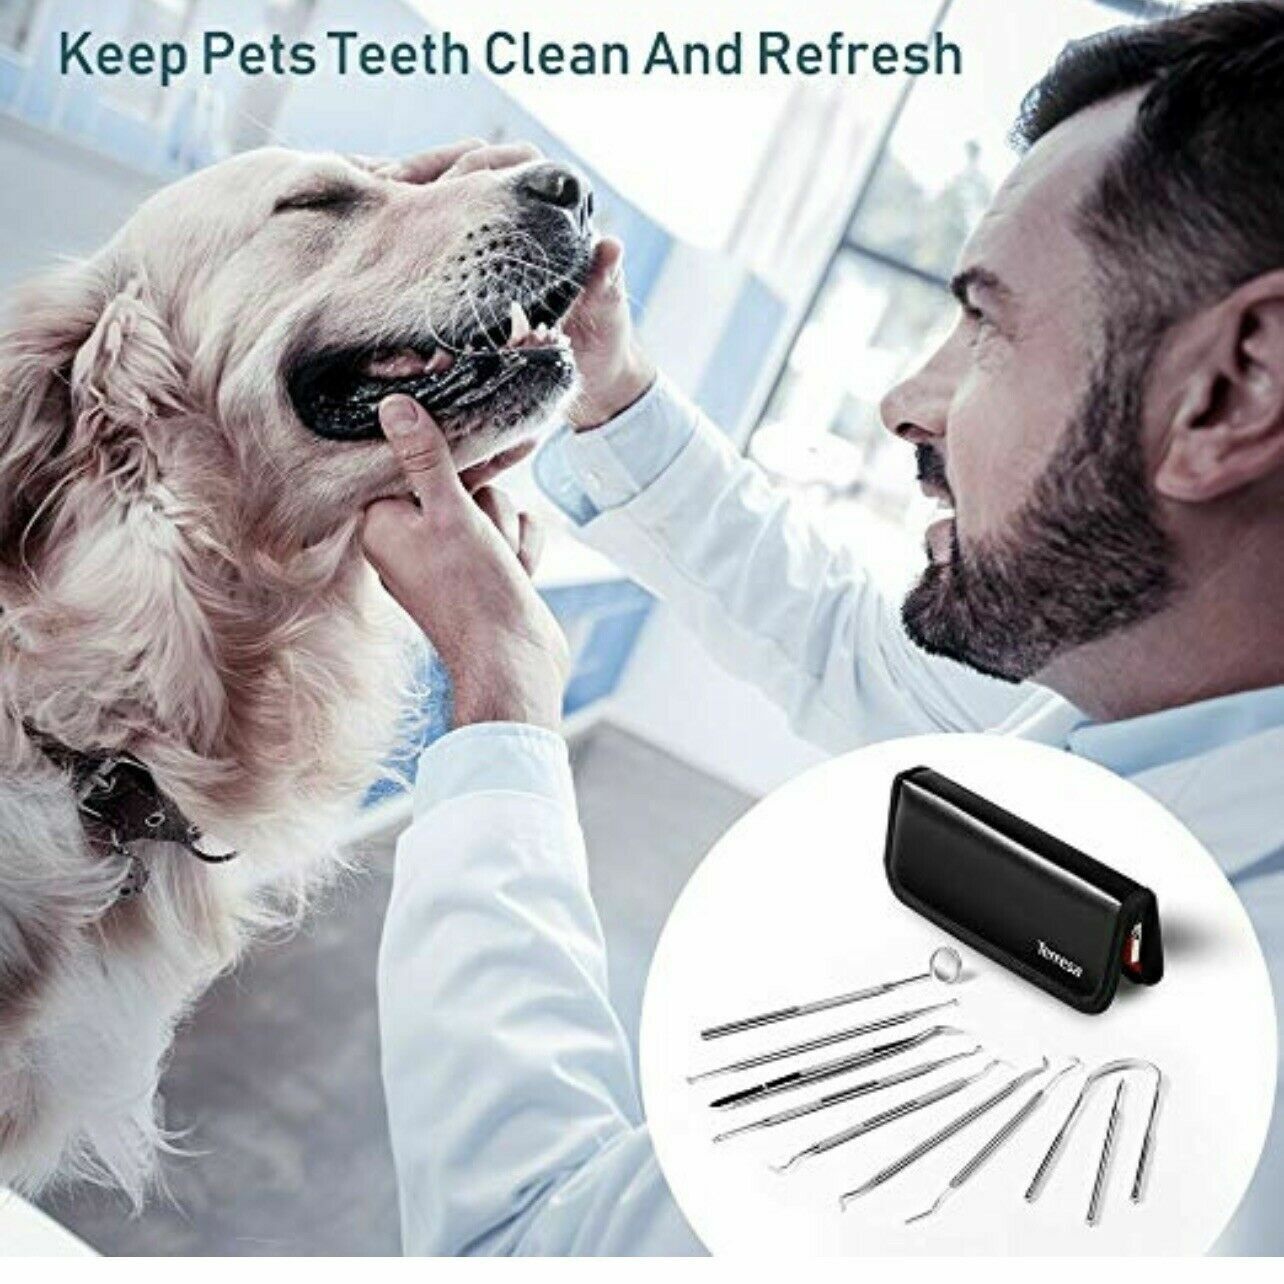 Dental Tooth Cleaning Kit Dentist Scraper Pick Tool Calculus Plaque Flos Remover TERRESA Does Not Apply - фотография #3